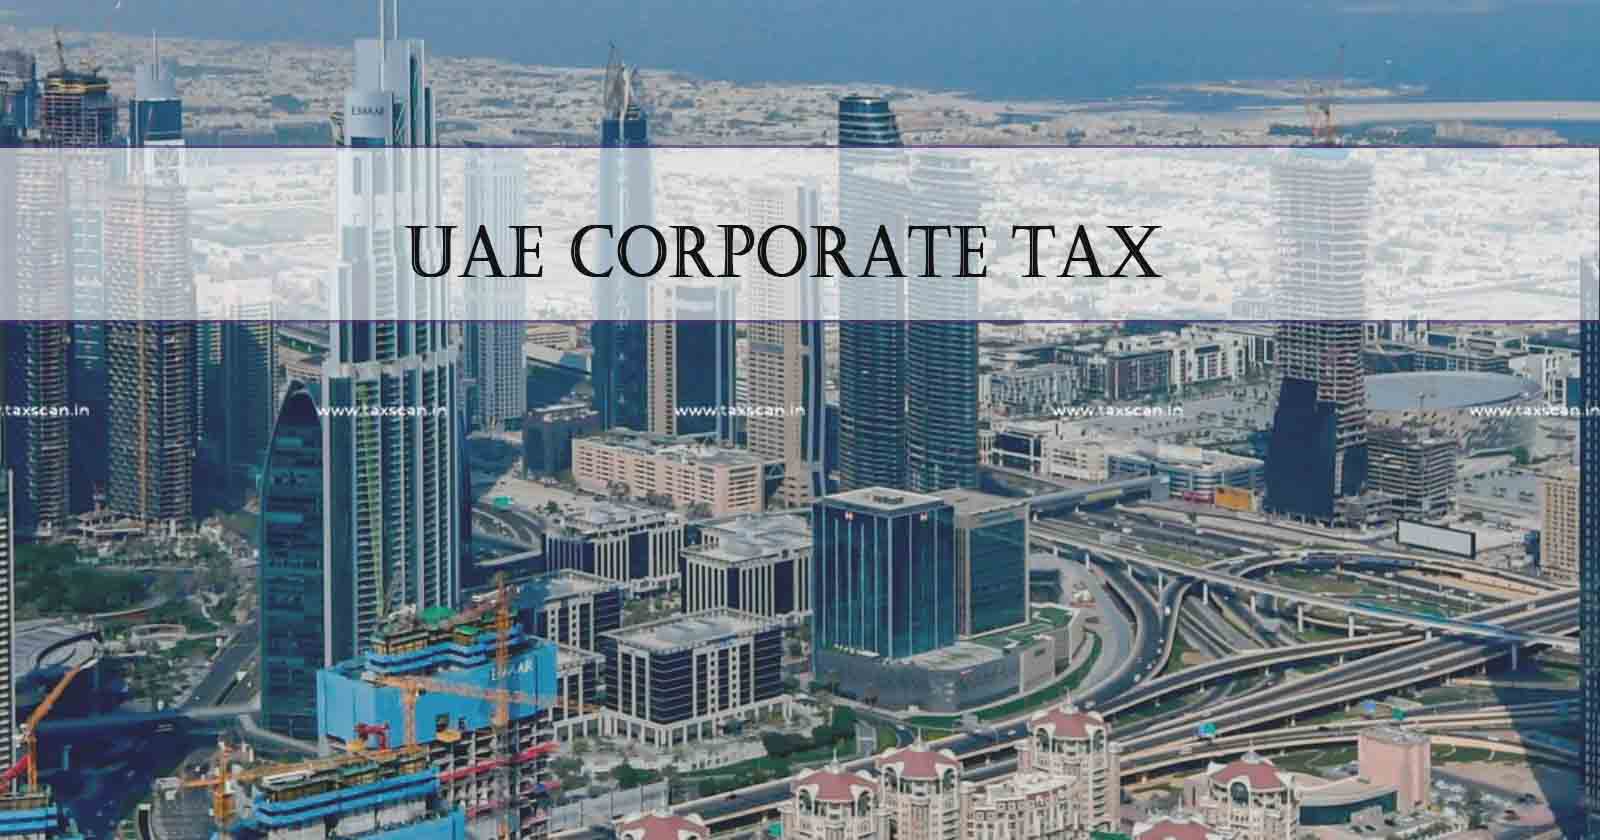 UAE Tax - Pay Tax on Property Income - Property Income - Corporate Tax Regime - taxscan